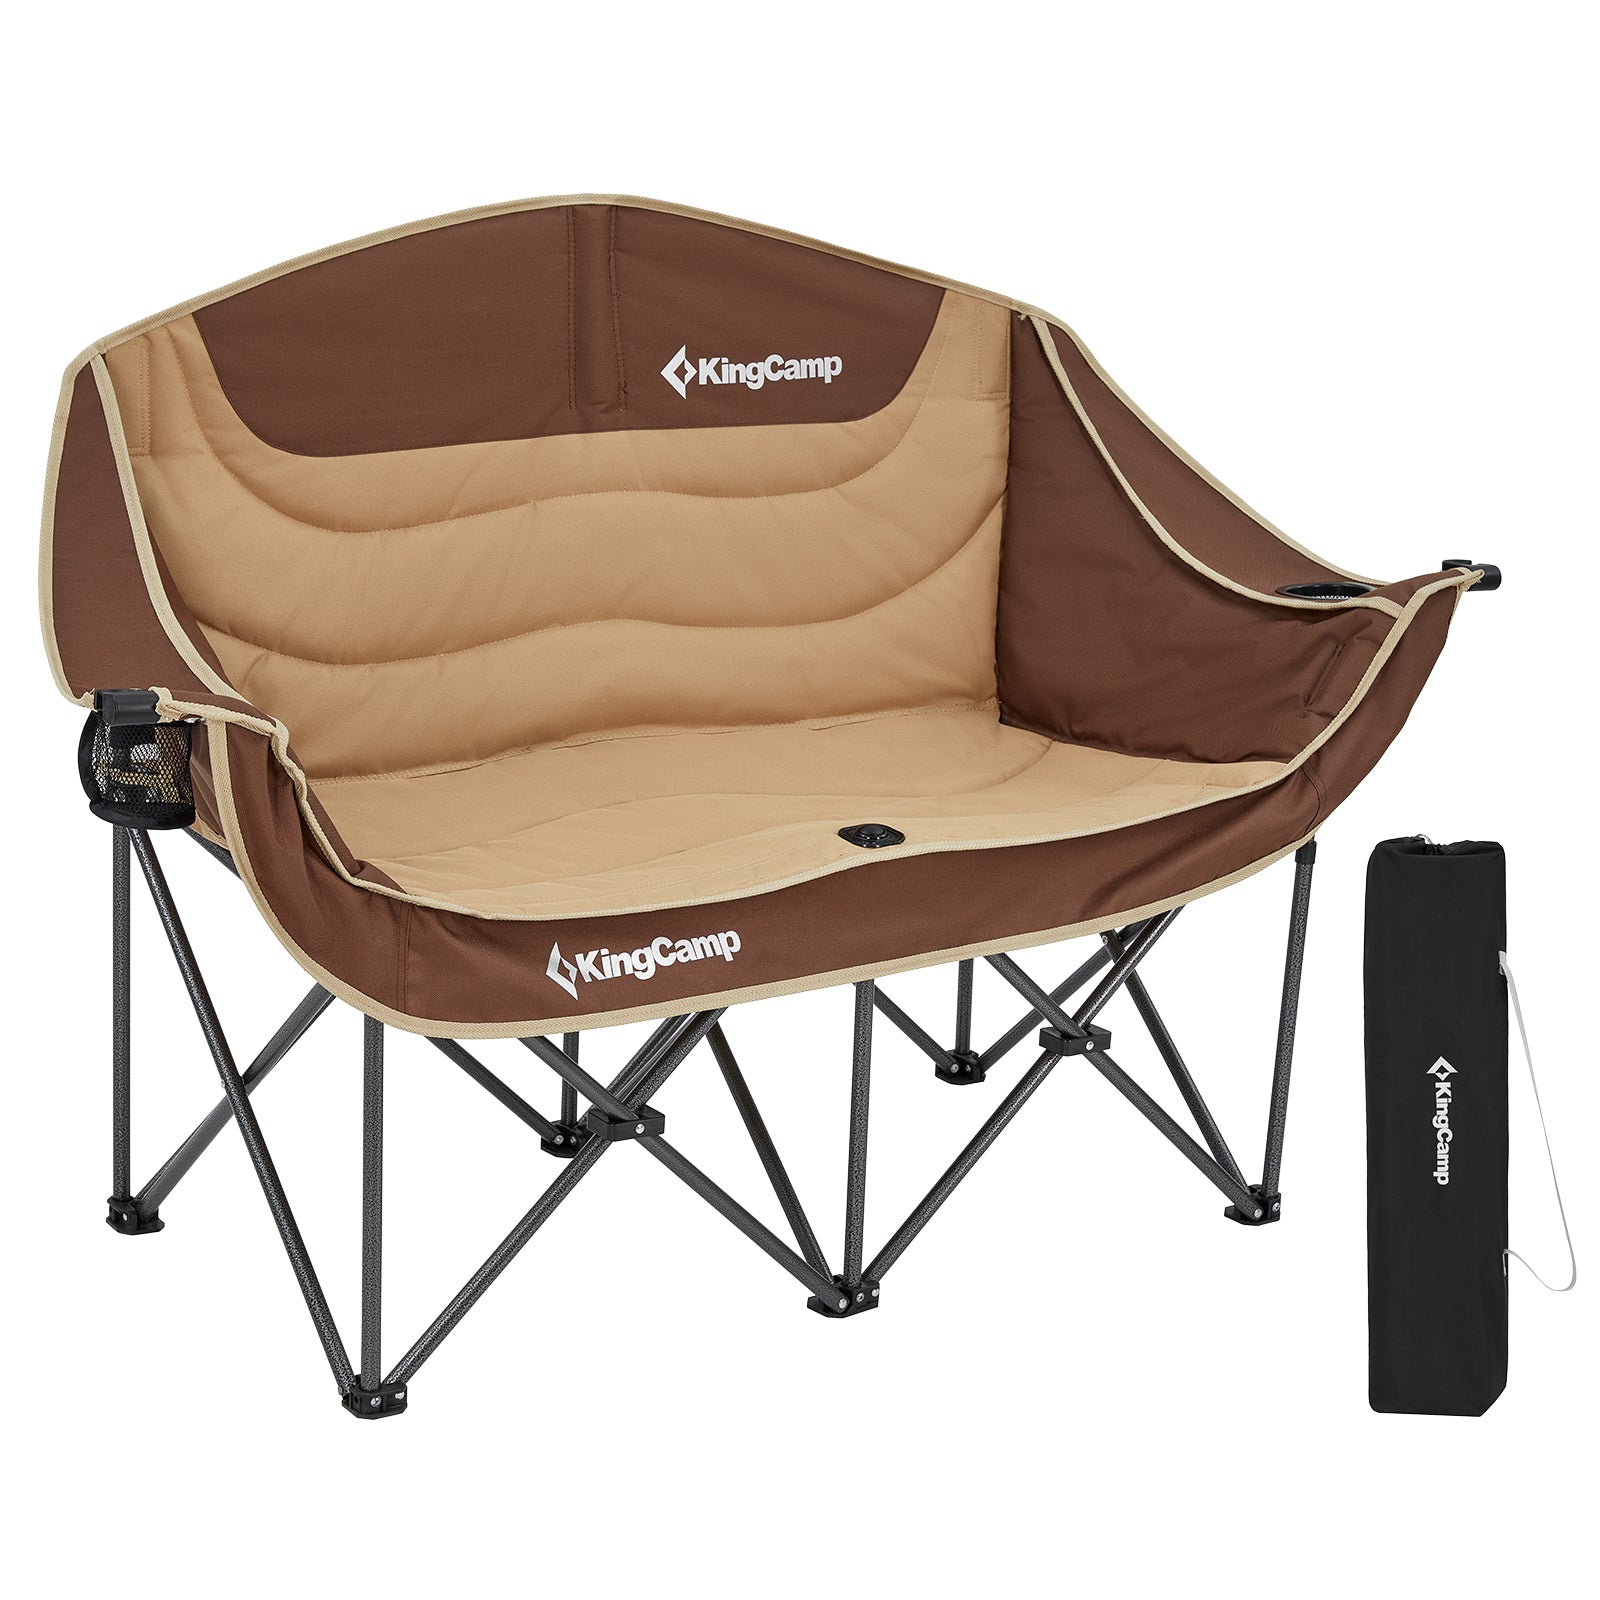 KingCamp Loveseat Double Seat Chair